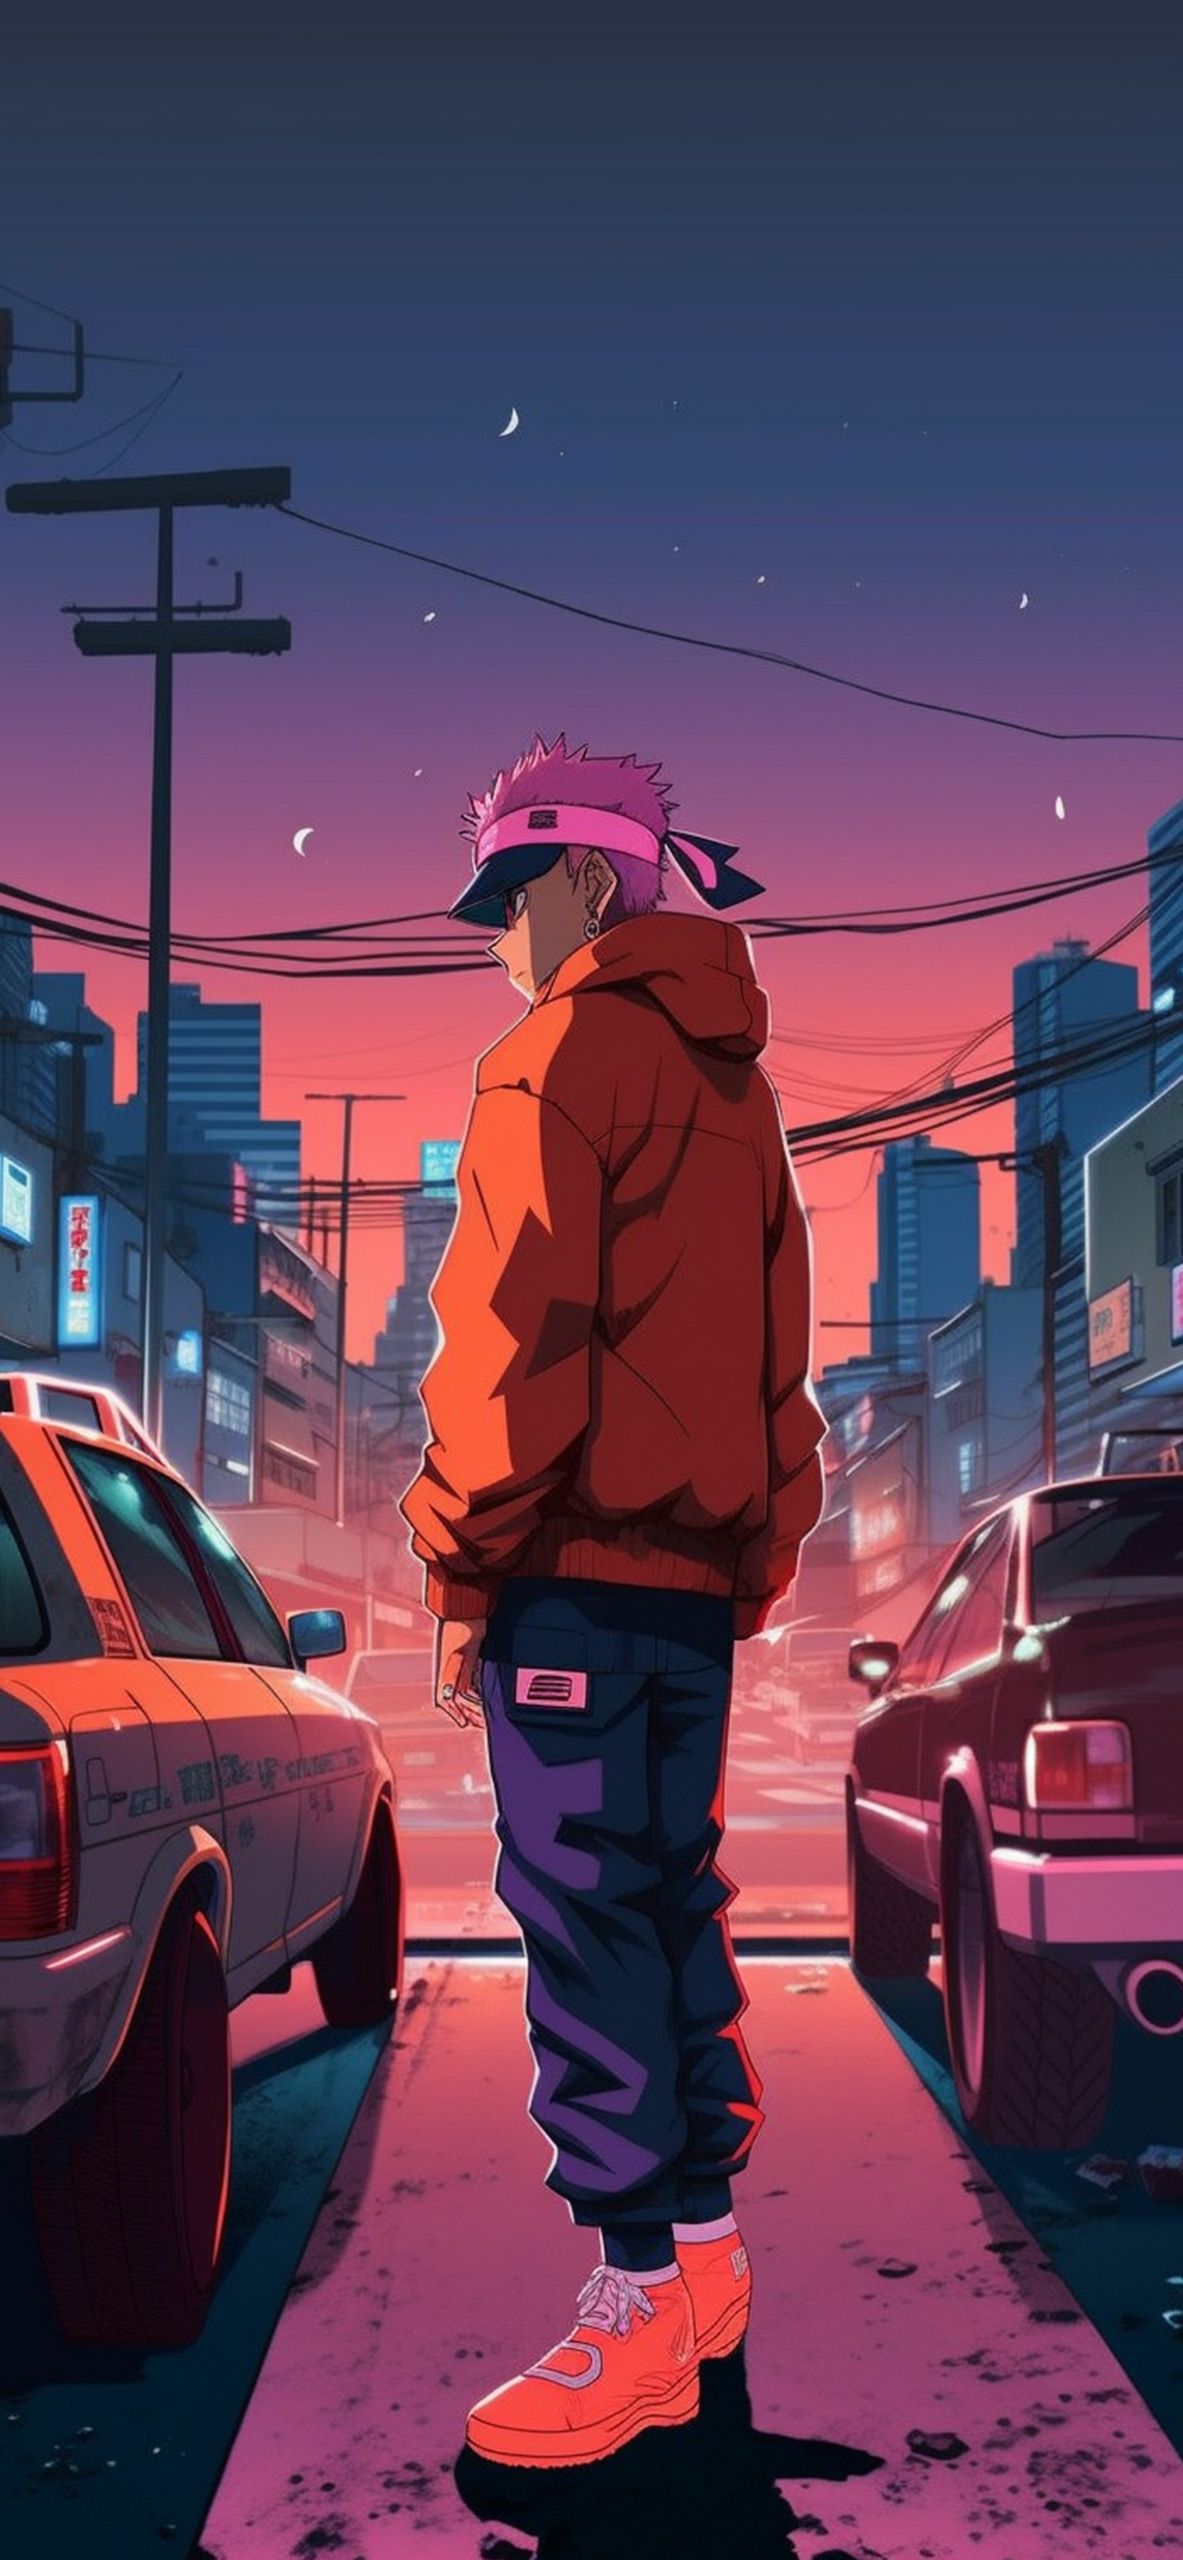 Naruto in the City Wallpaper Aesthetic Wallpaper iPhone